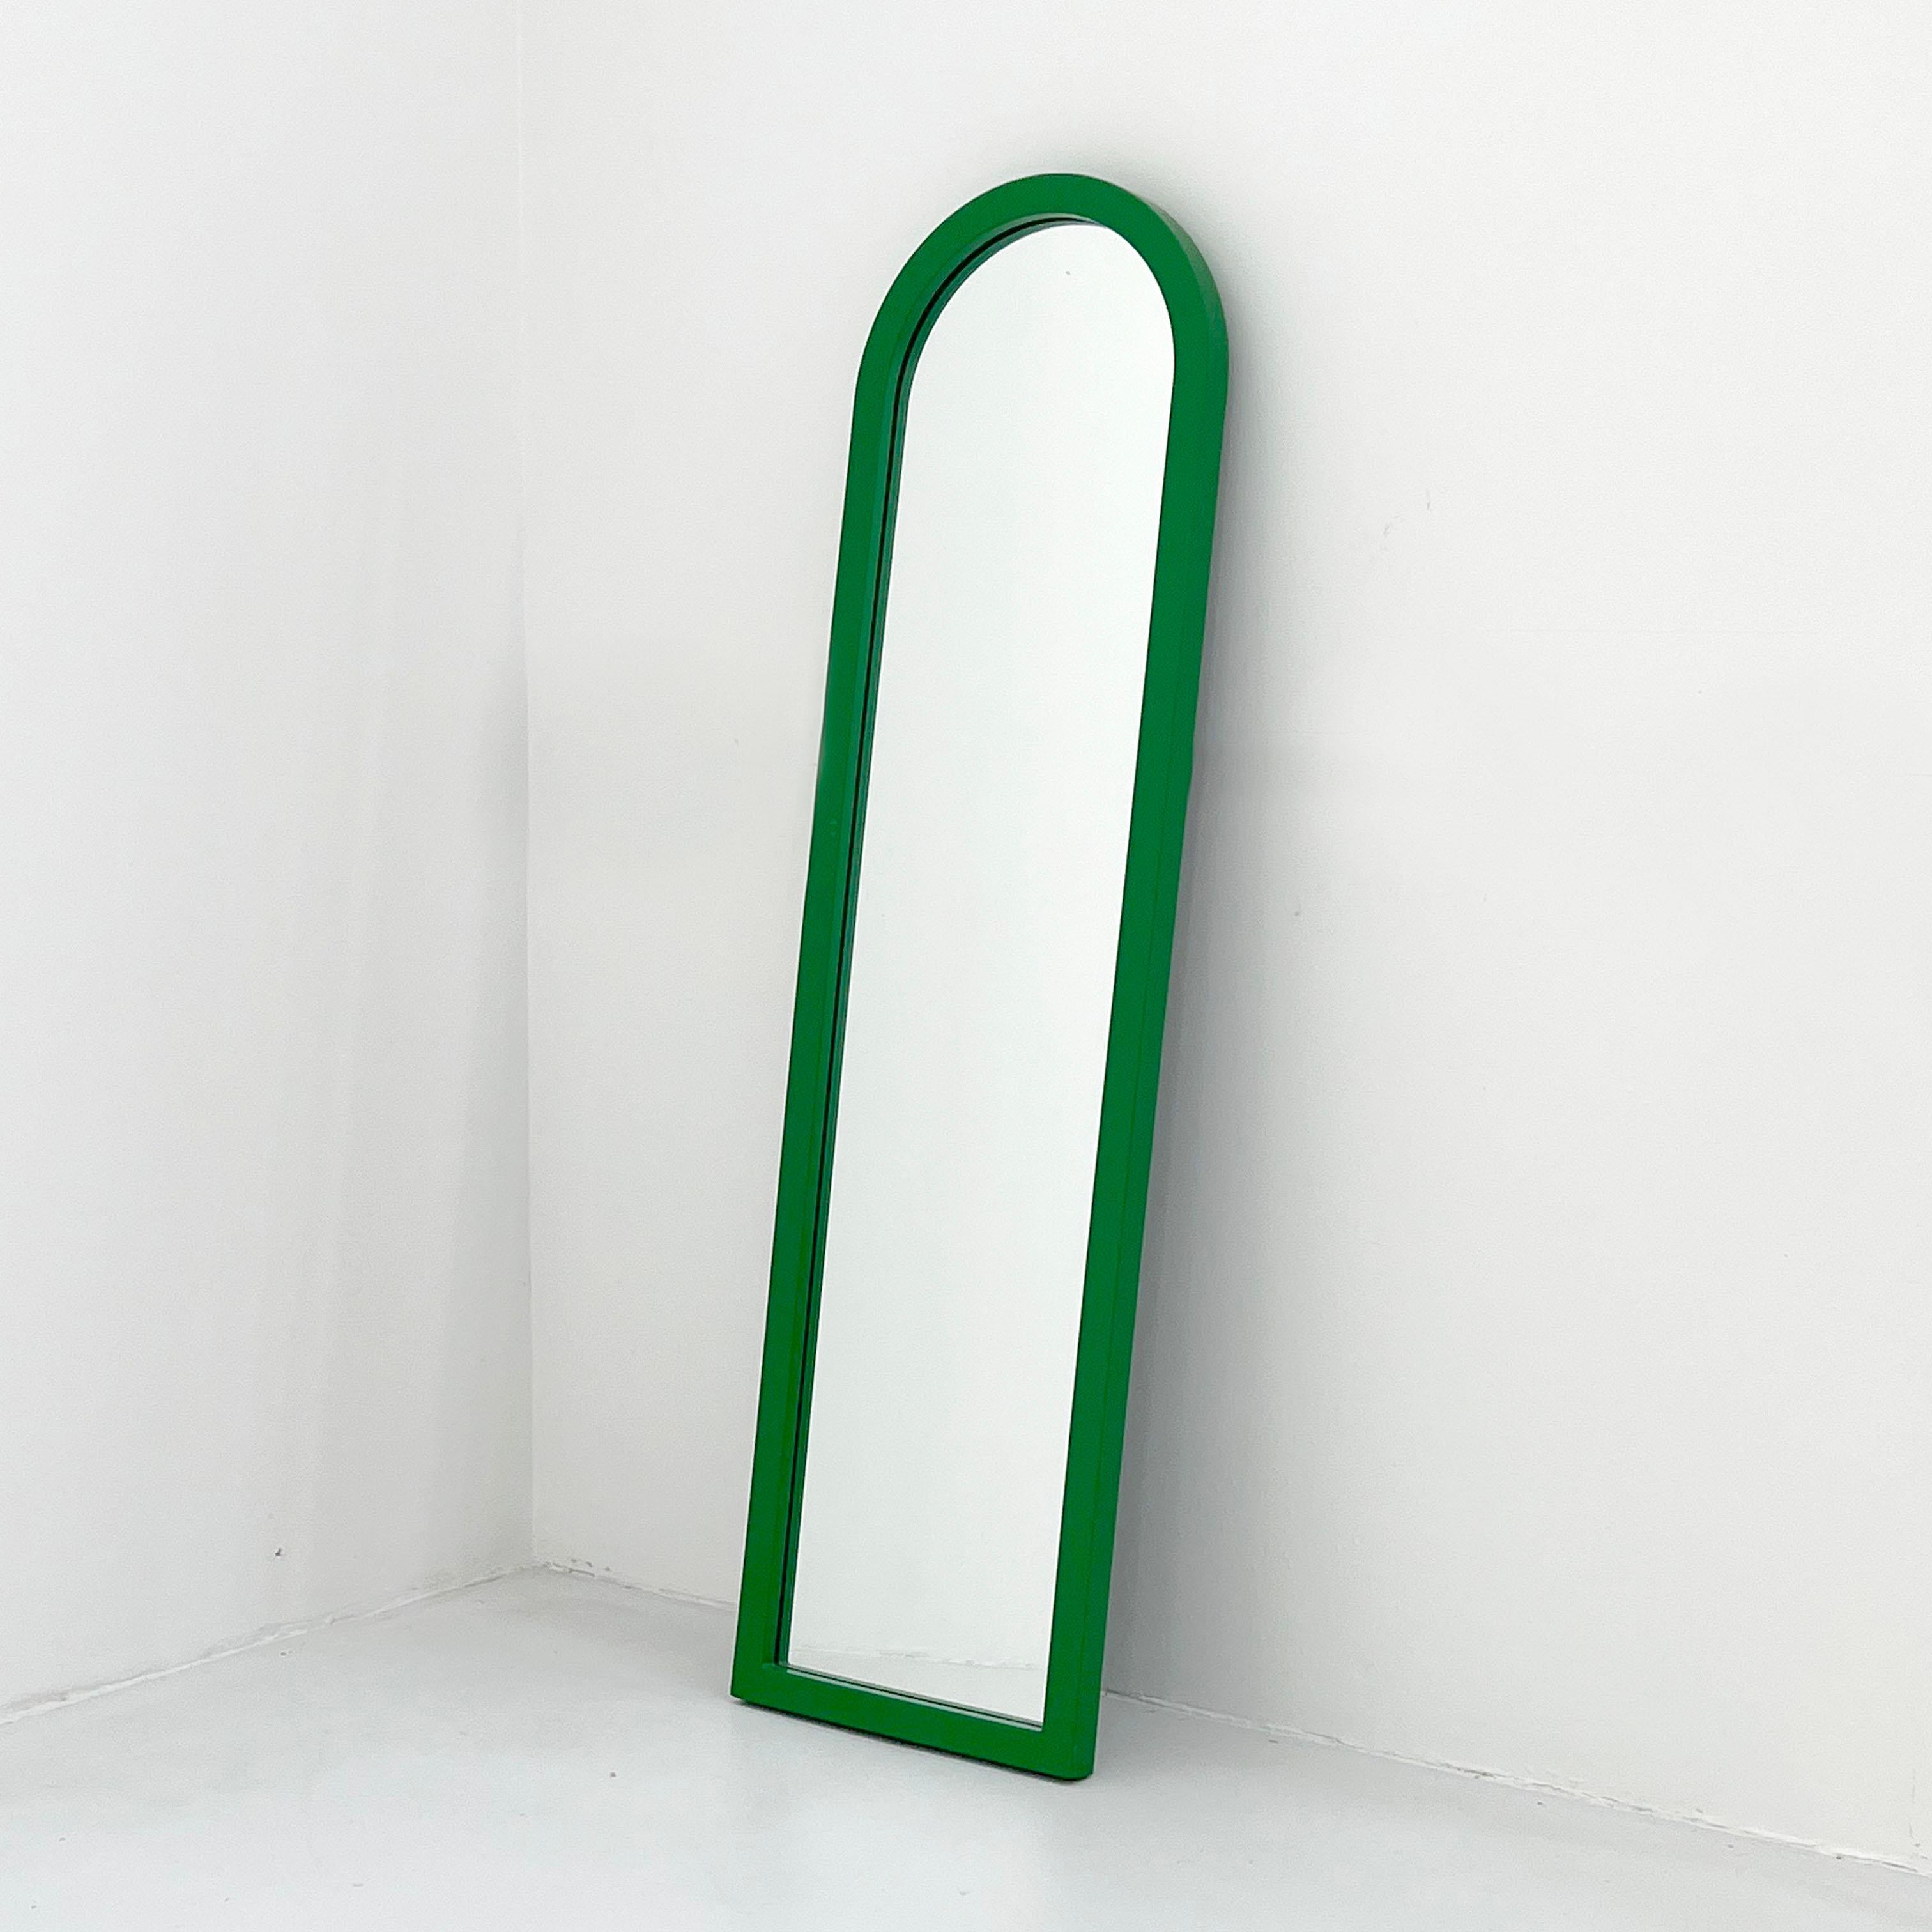 Designer - Anna Castelli Ferrieri
Producer - Kartell 
Model - Model 4720
Design Period - Eighties
Measurements - Width 30 cm x Depth 4 cm x Height 110 cm
Materials - Expanded polyurethane, mirror
Color - Green
Comments - Light wear consistent with